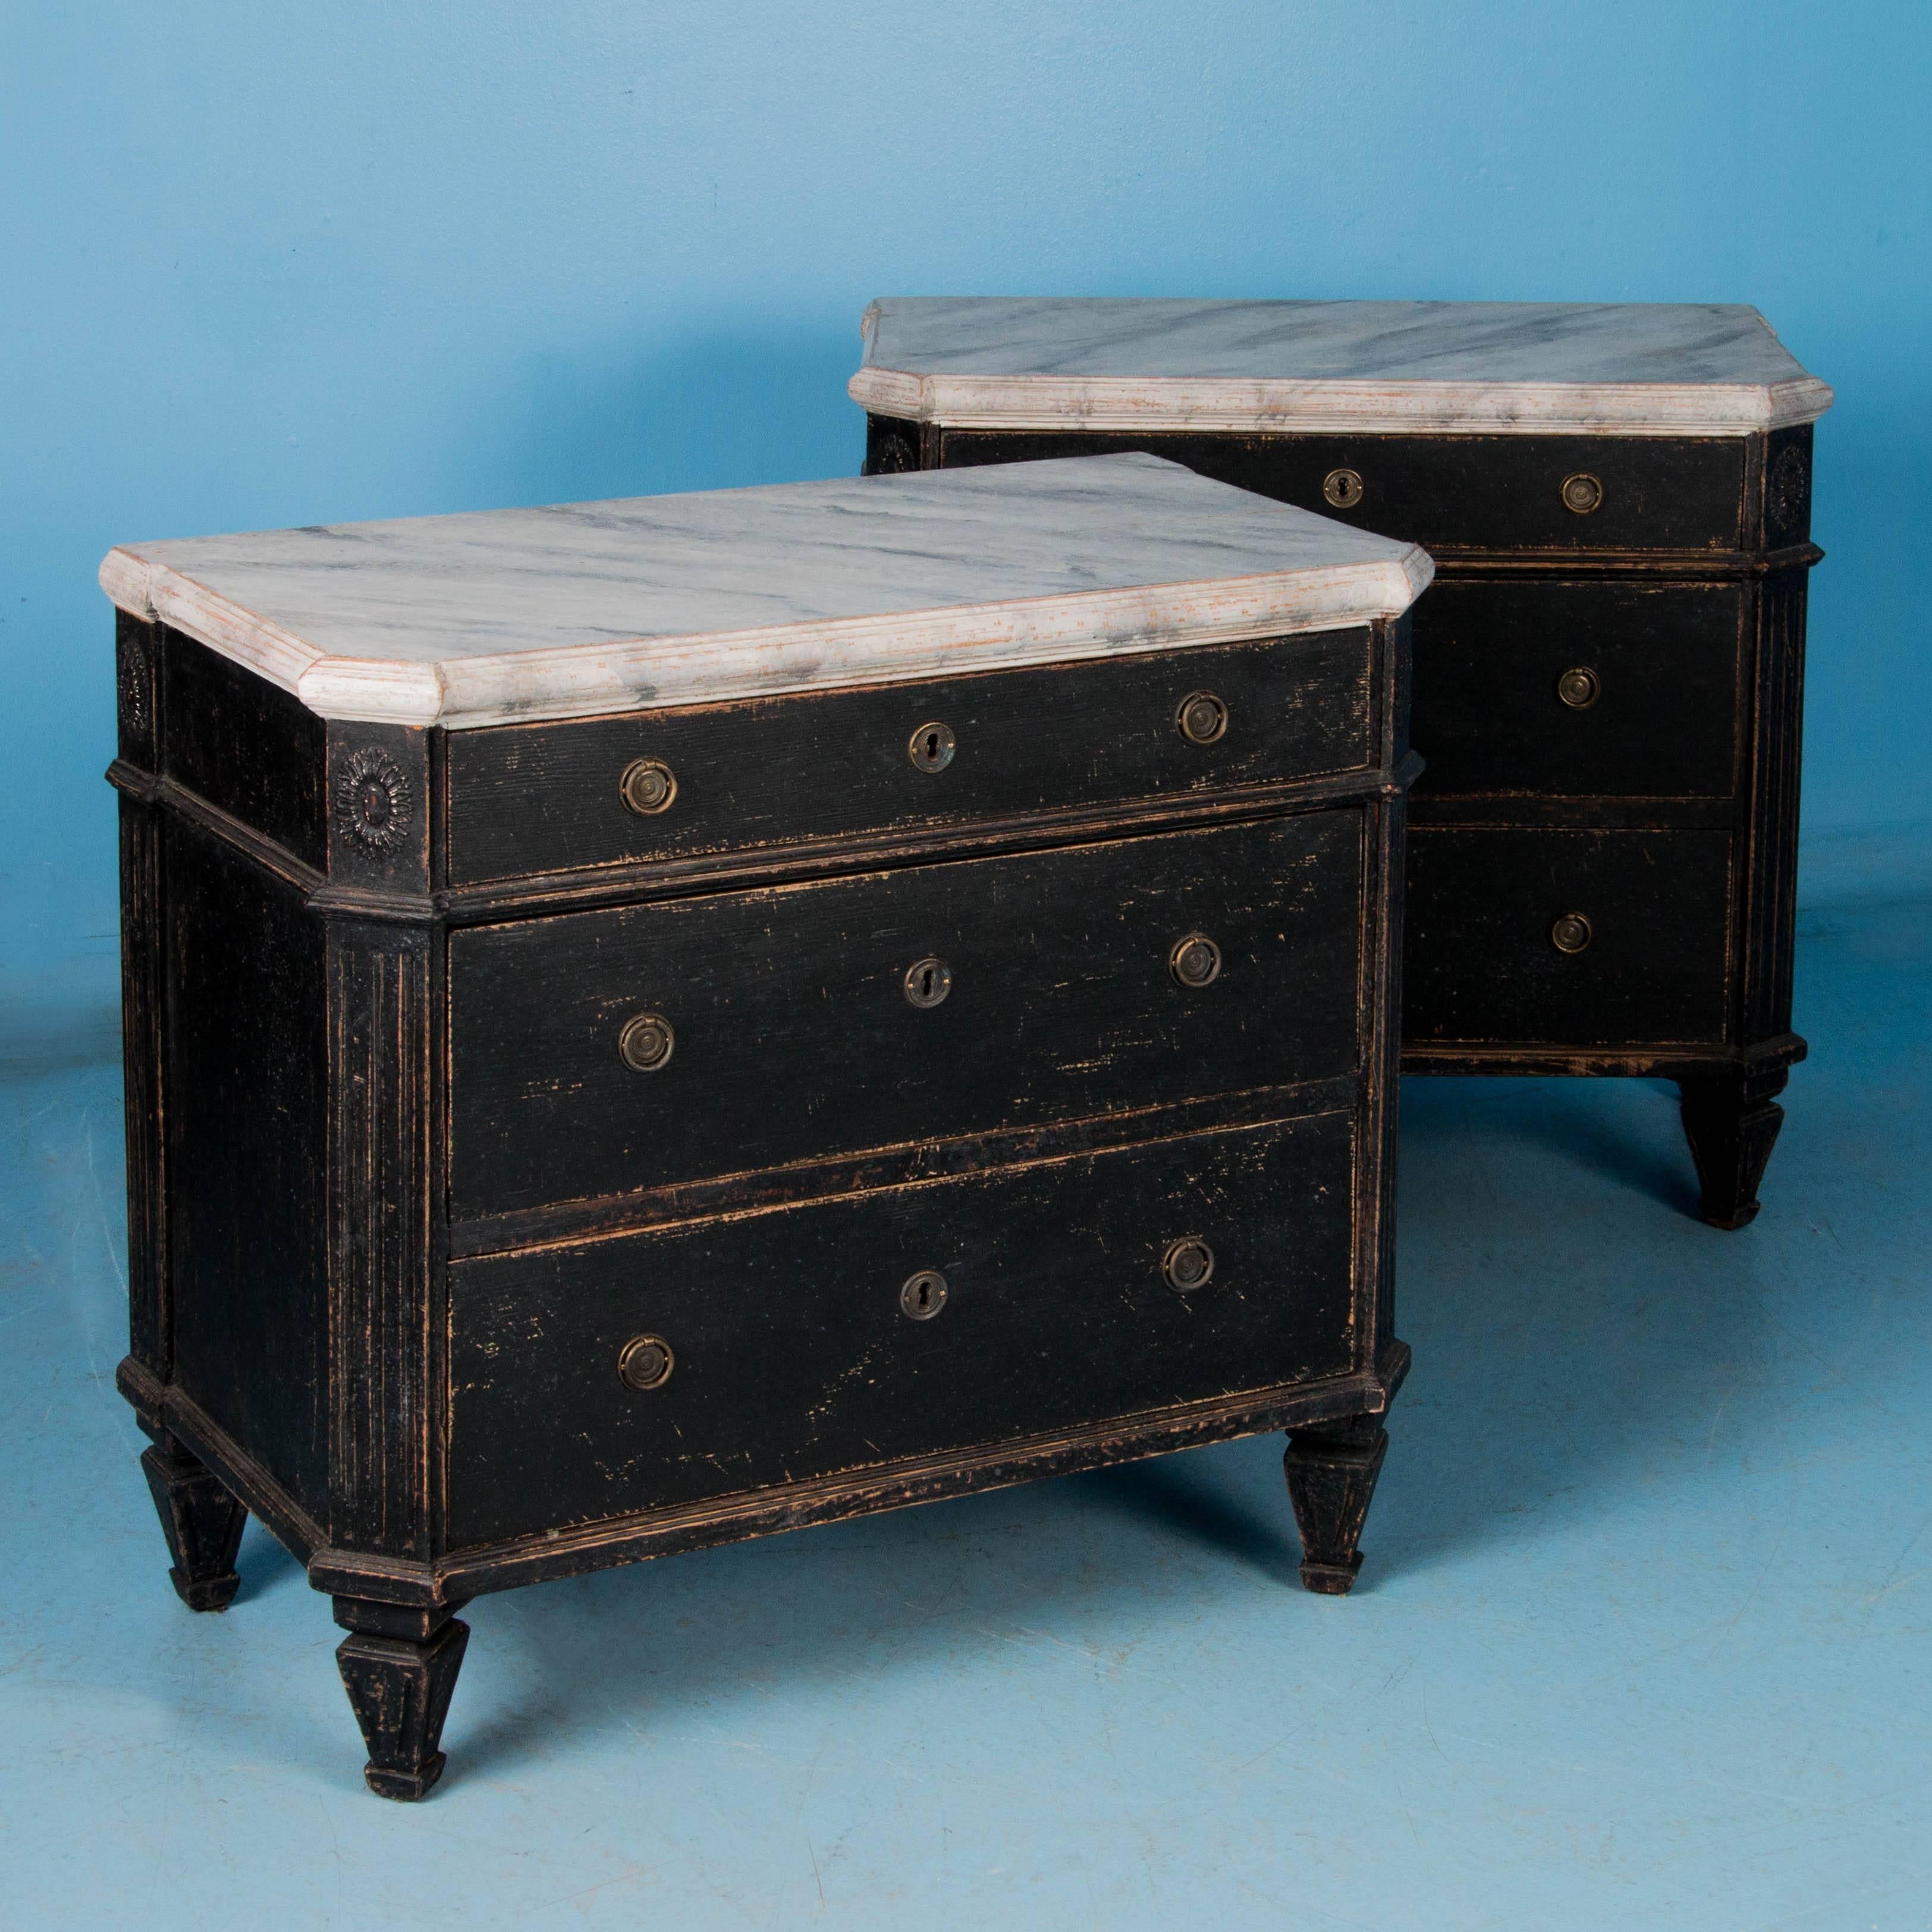 This pair of small antique chest of drawers, circa 1860, features painted white faux marble tops which are the perfect contrast to the black painted cases. The paint is lightly distressed allowing the natural pine to show through. Please take a